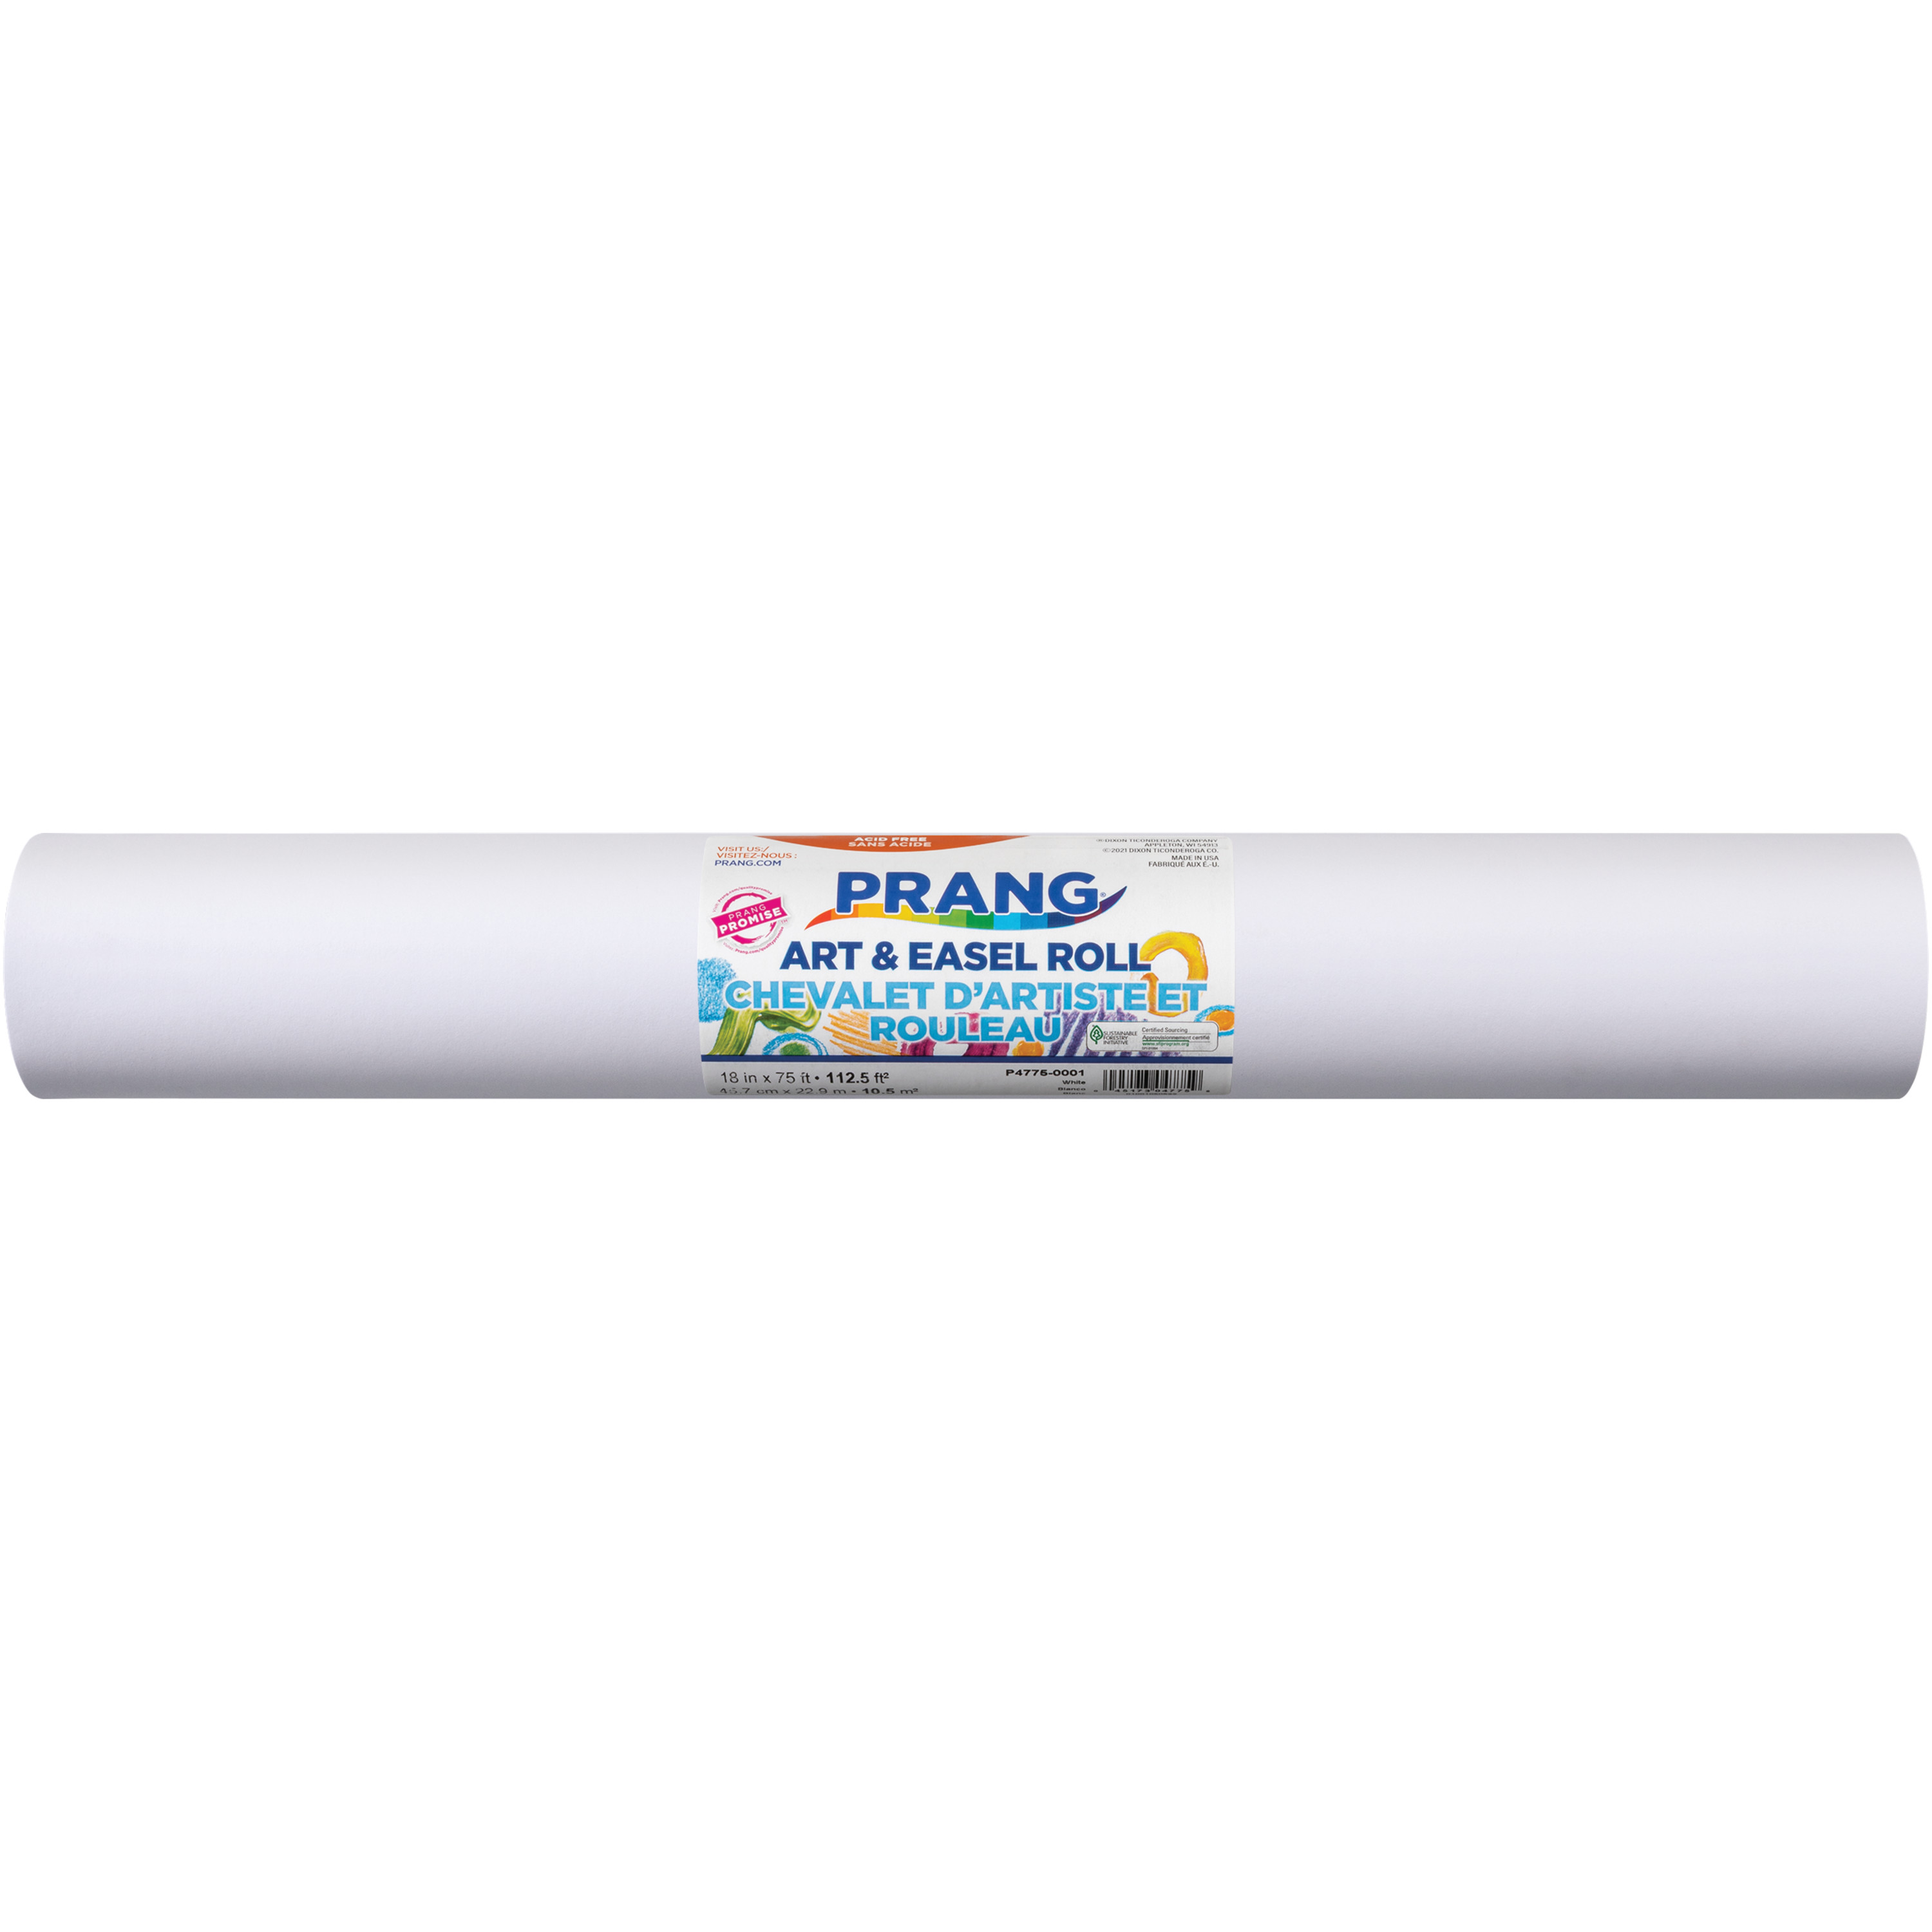 Pacon Easel Roll, 18-Inch x 75-Feet, White, 1 Roll of Paper - image 1 of 7